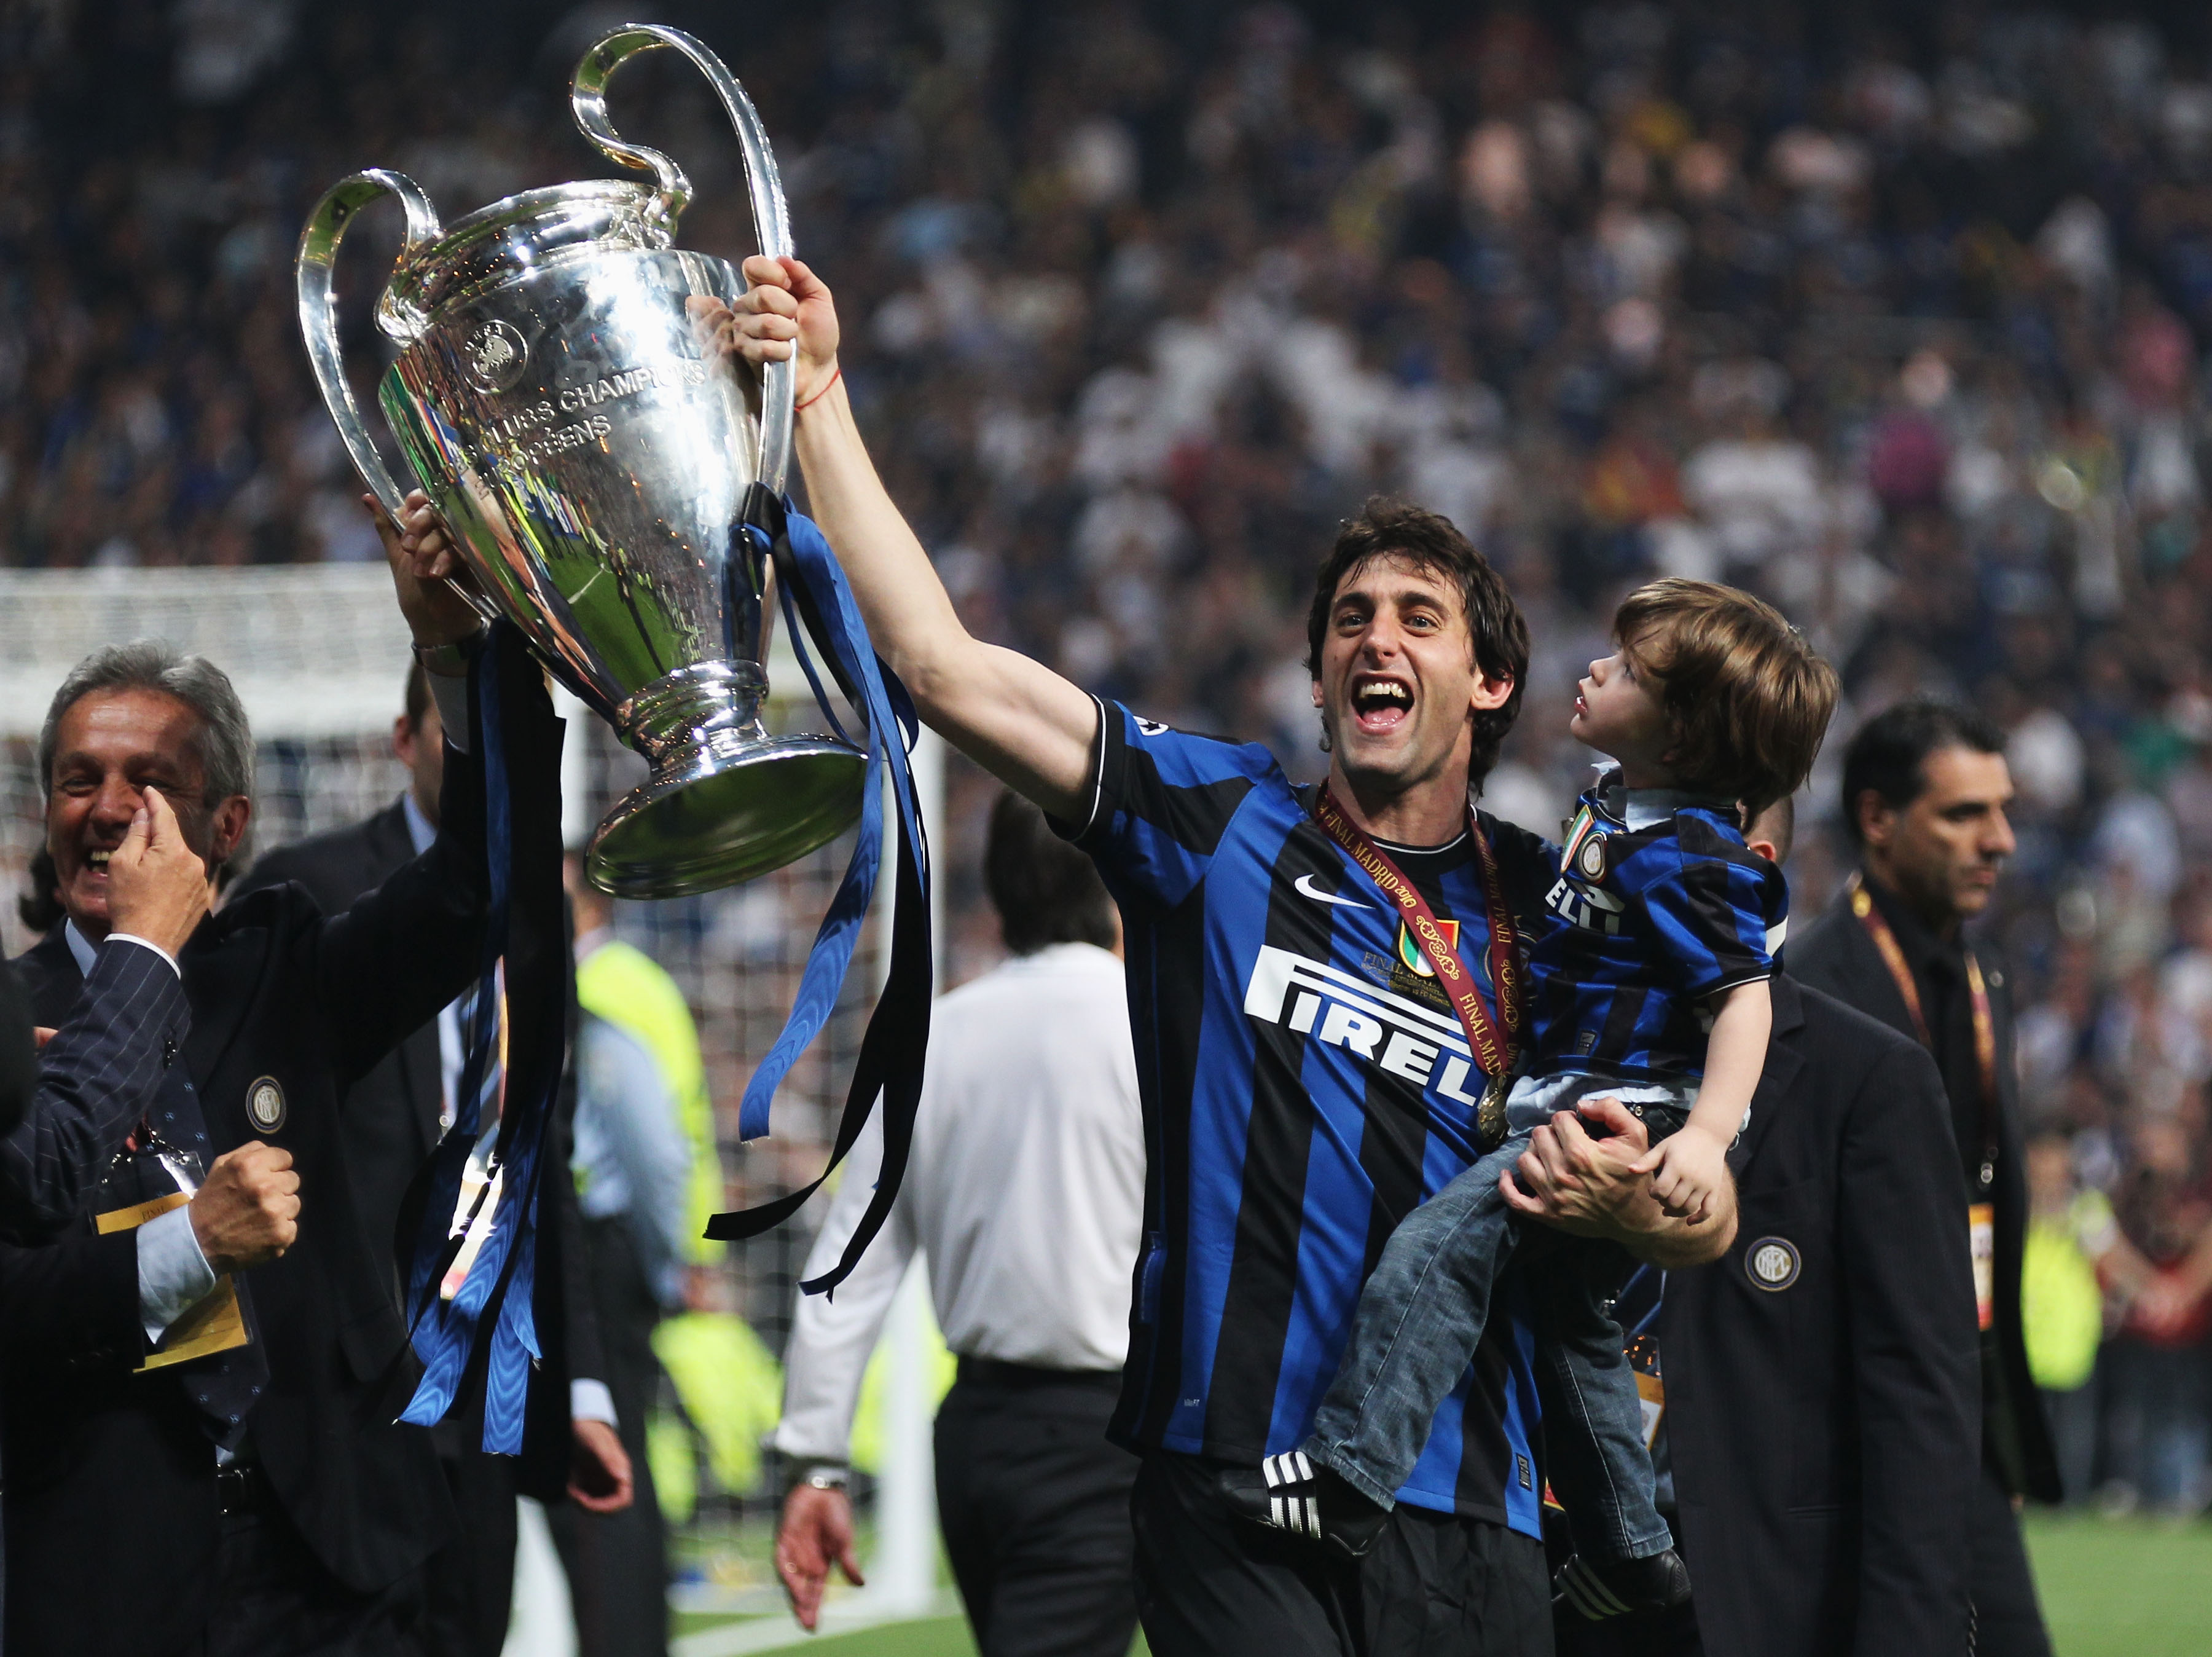 MADRID, SPAIN - MAY 22:  Double goalscorer Diego Milito of Inter Milan celebrates victory after the UEFA Champions League Final match between FC Bayern Muenchen and Inter Milan at the Estadio Santiago Bernabeu on May 22, 2010 in Madrid, Spain.  (Photo by